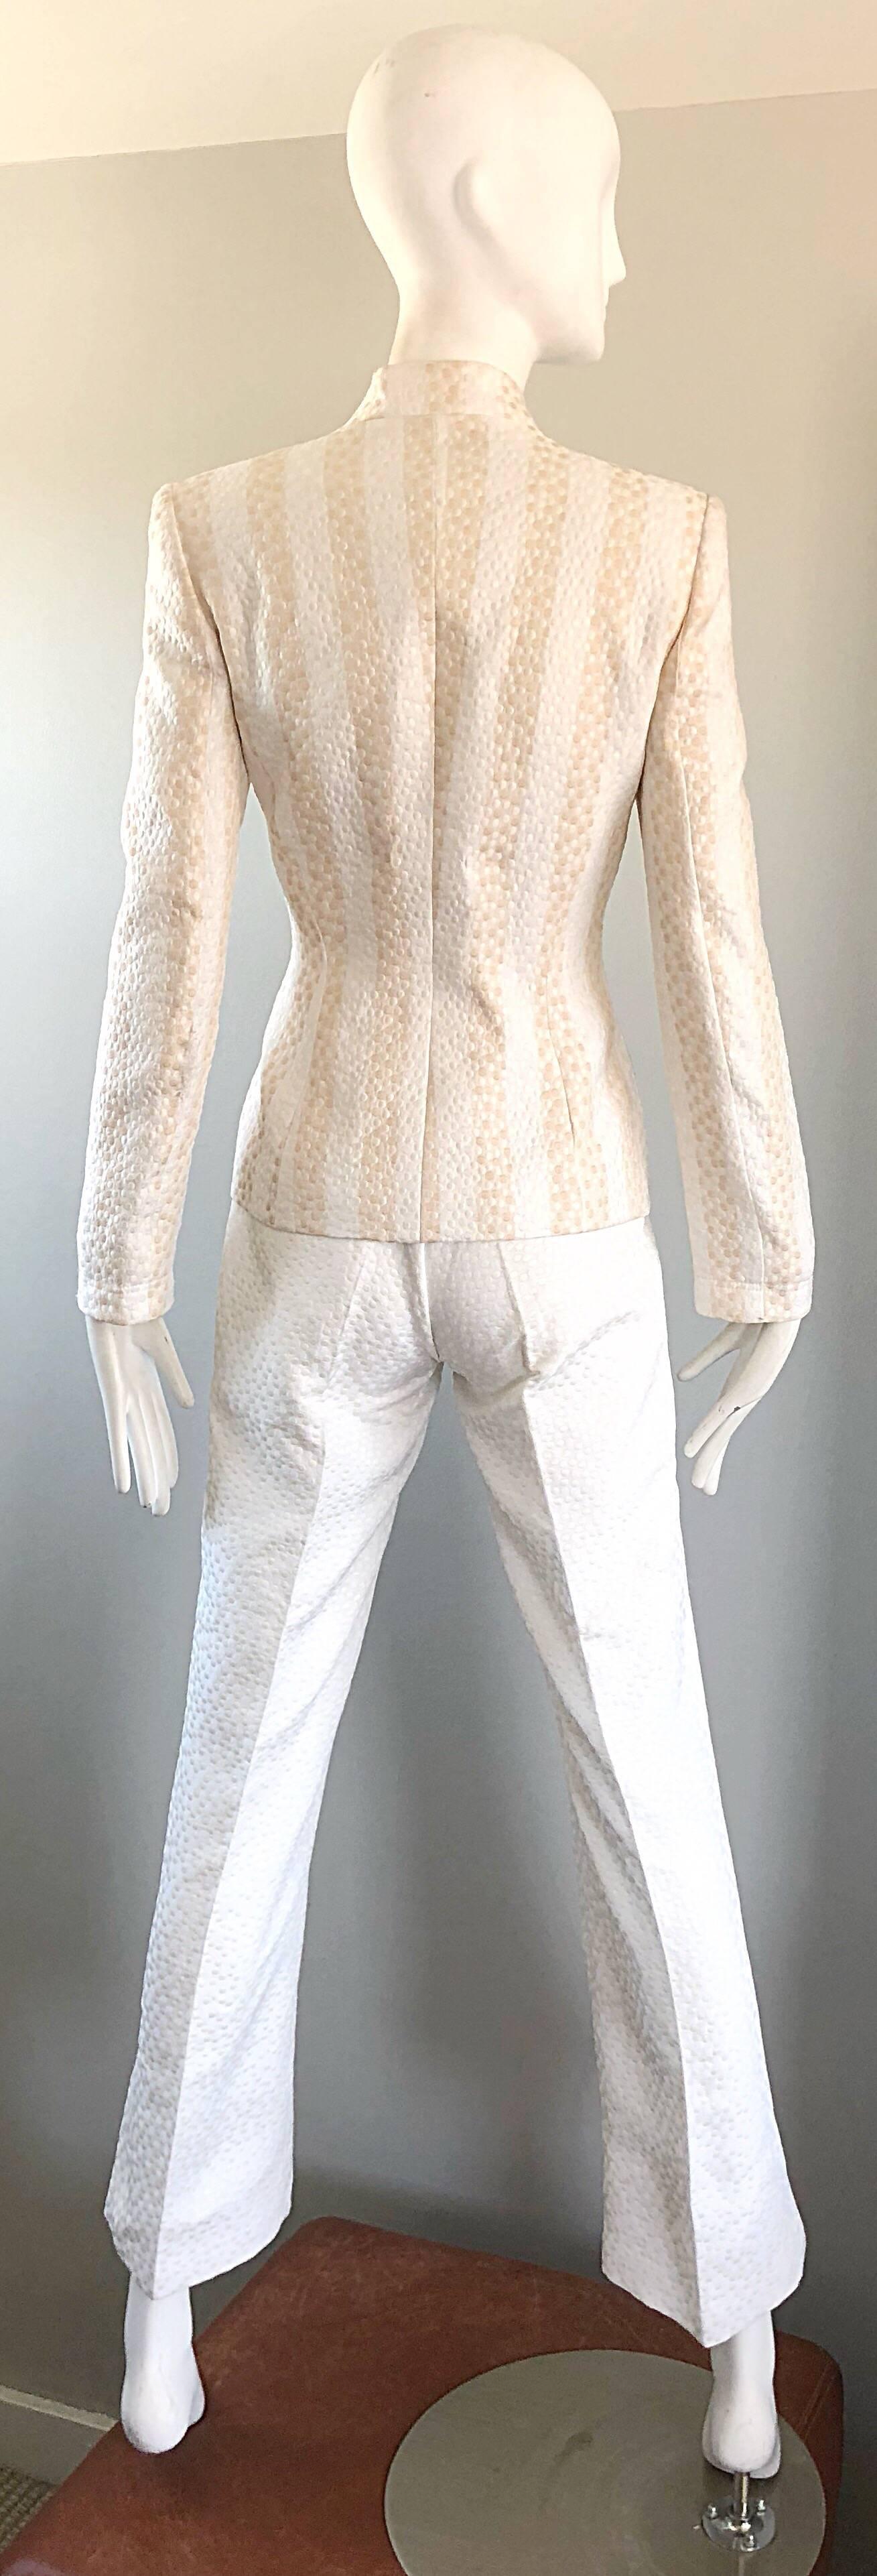 Vintage Max Nugus Couture 1990s White + Beige Polka Dot 90s Tailored Pant Suit 1